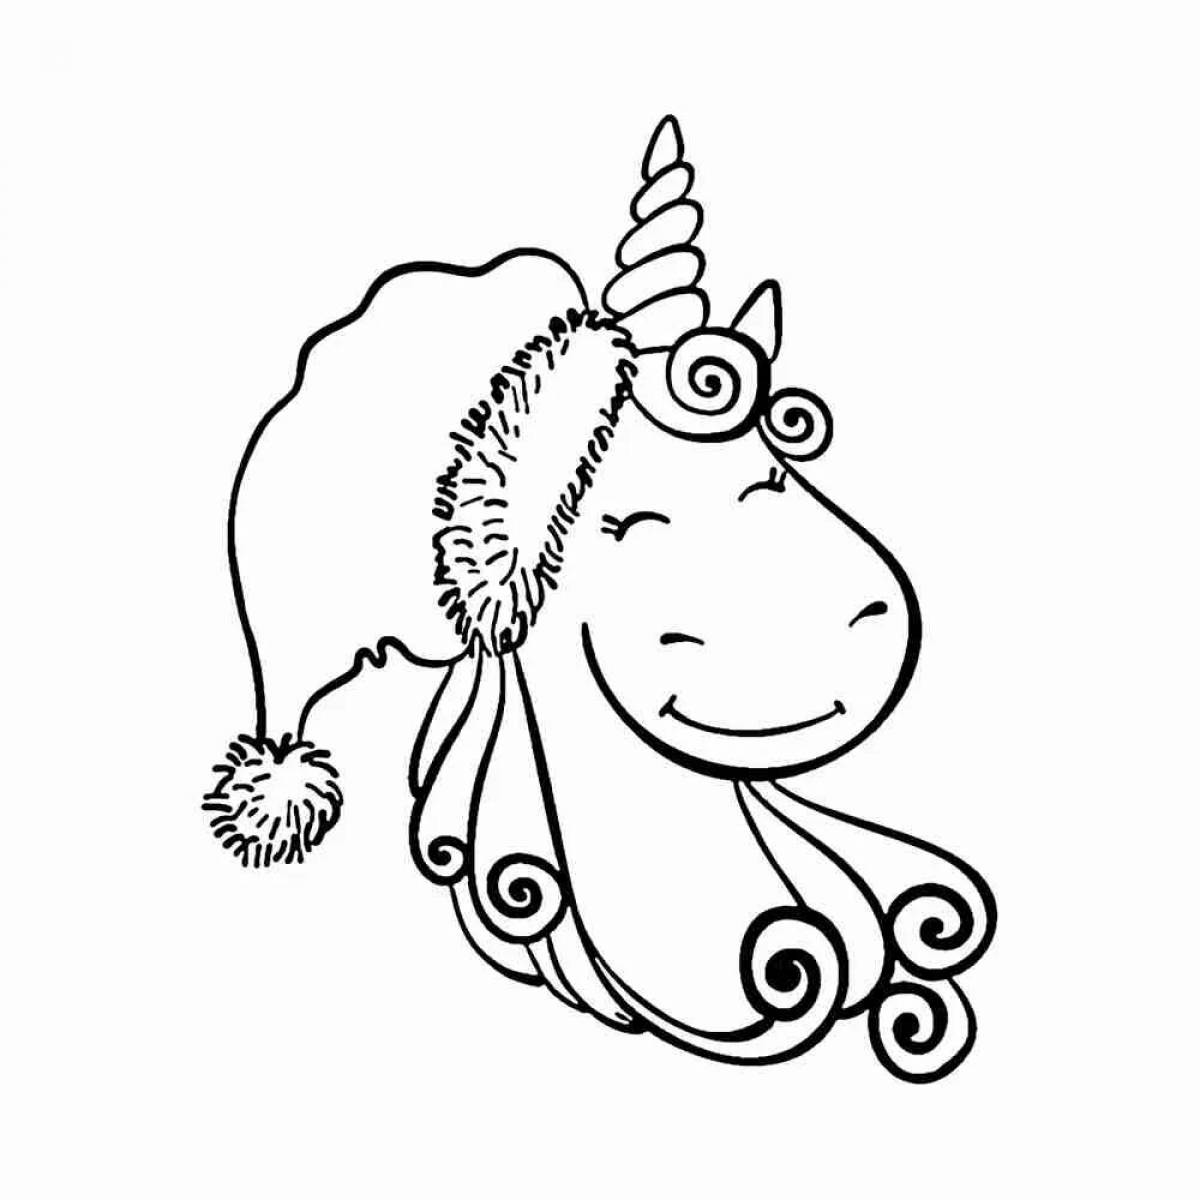 Great new year unicorn coloring book